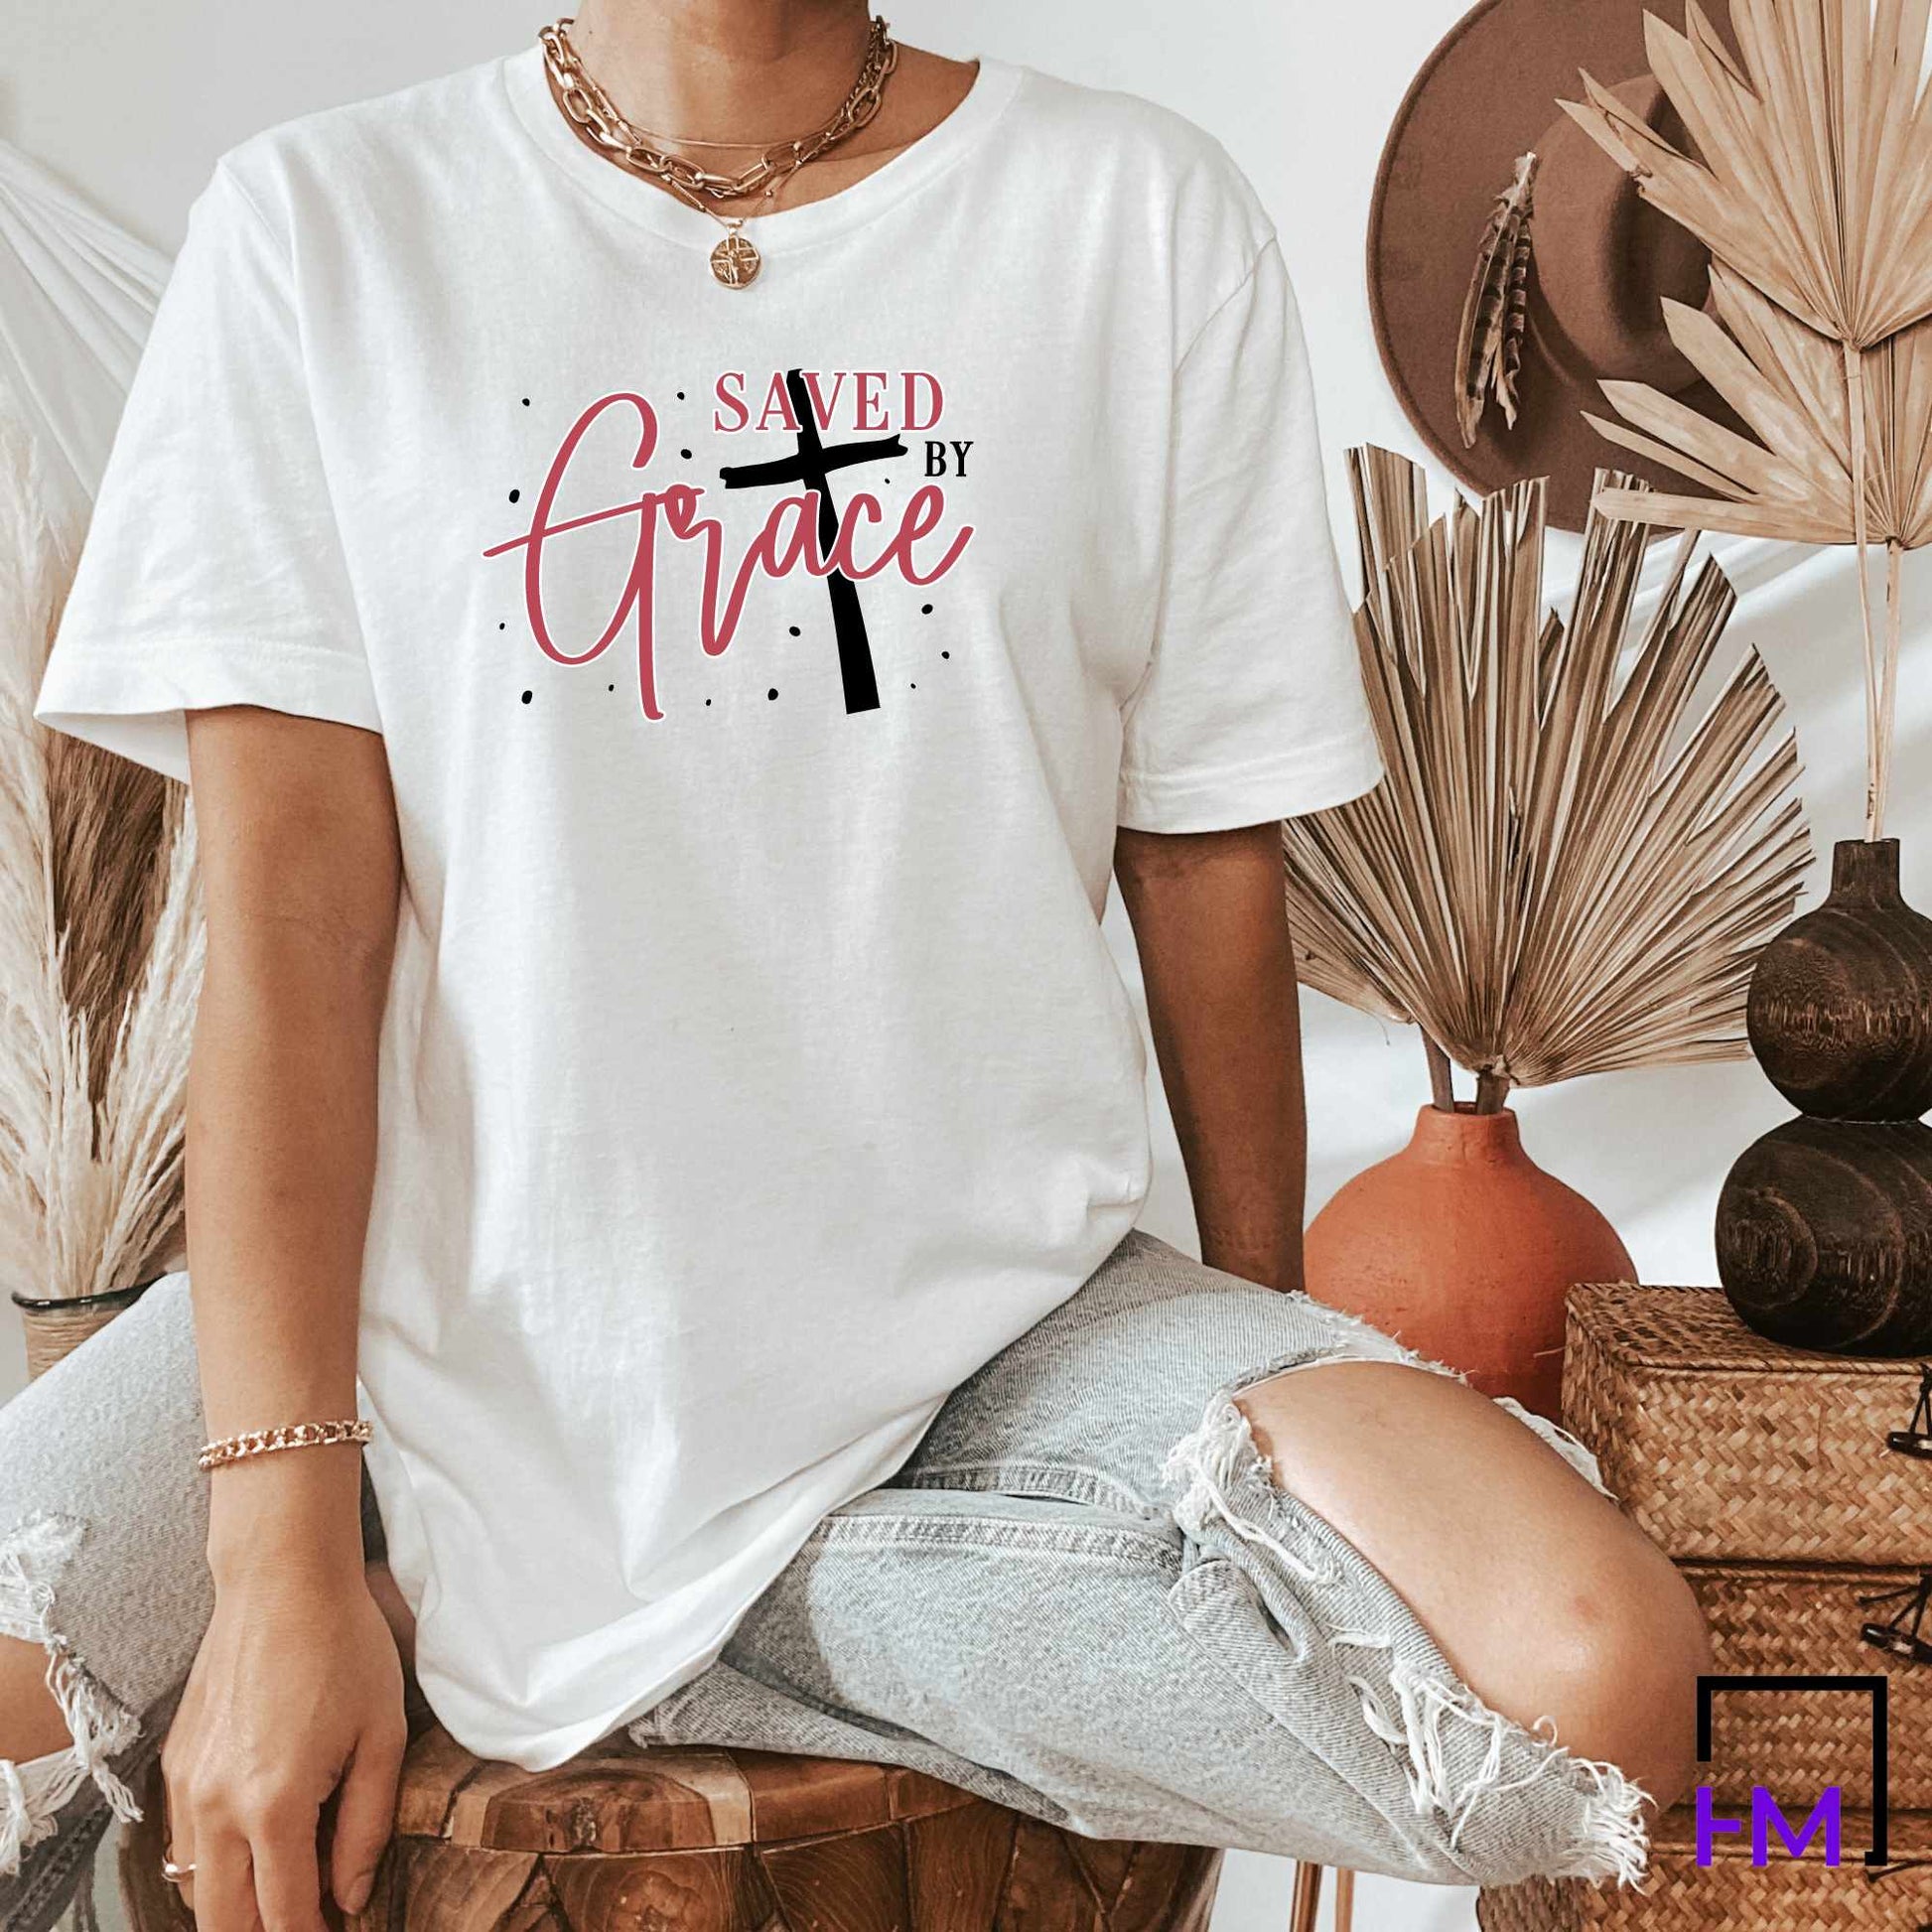 Saved by Grace, Women's Faith Shirts about Jesus